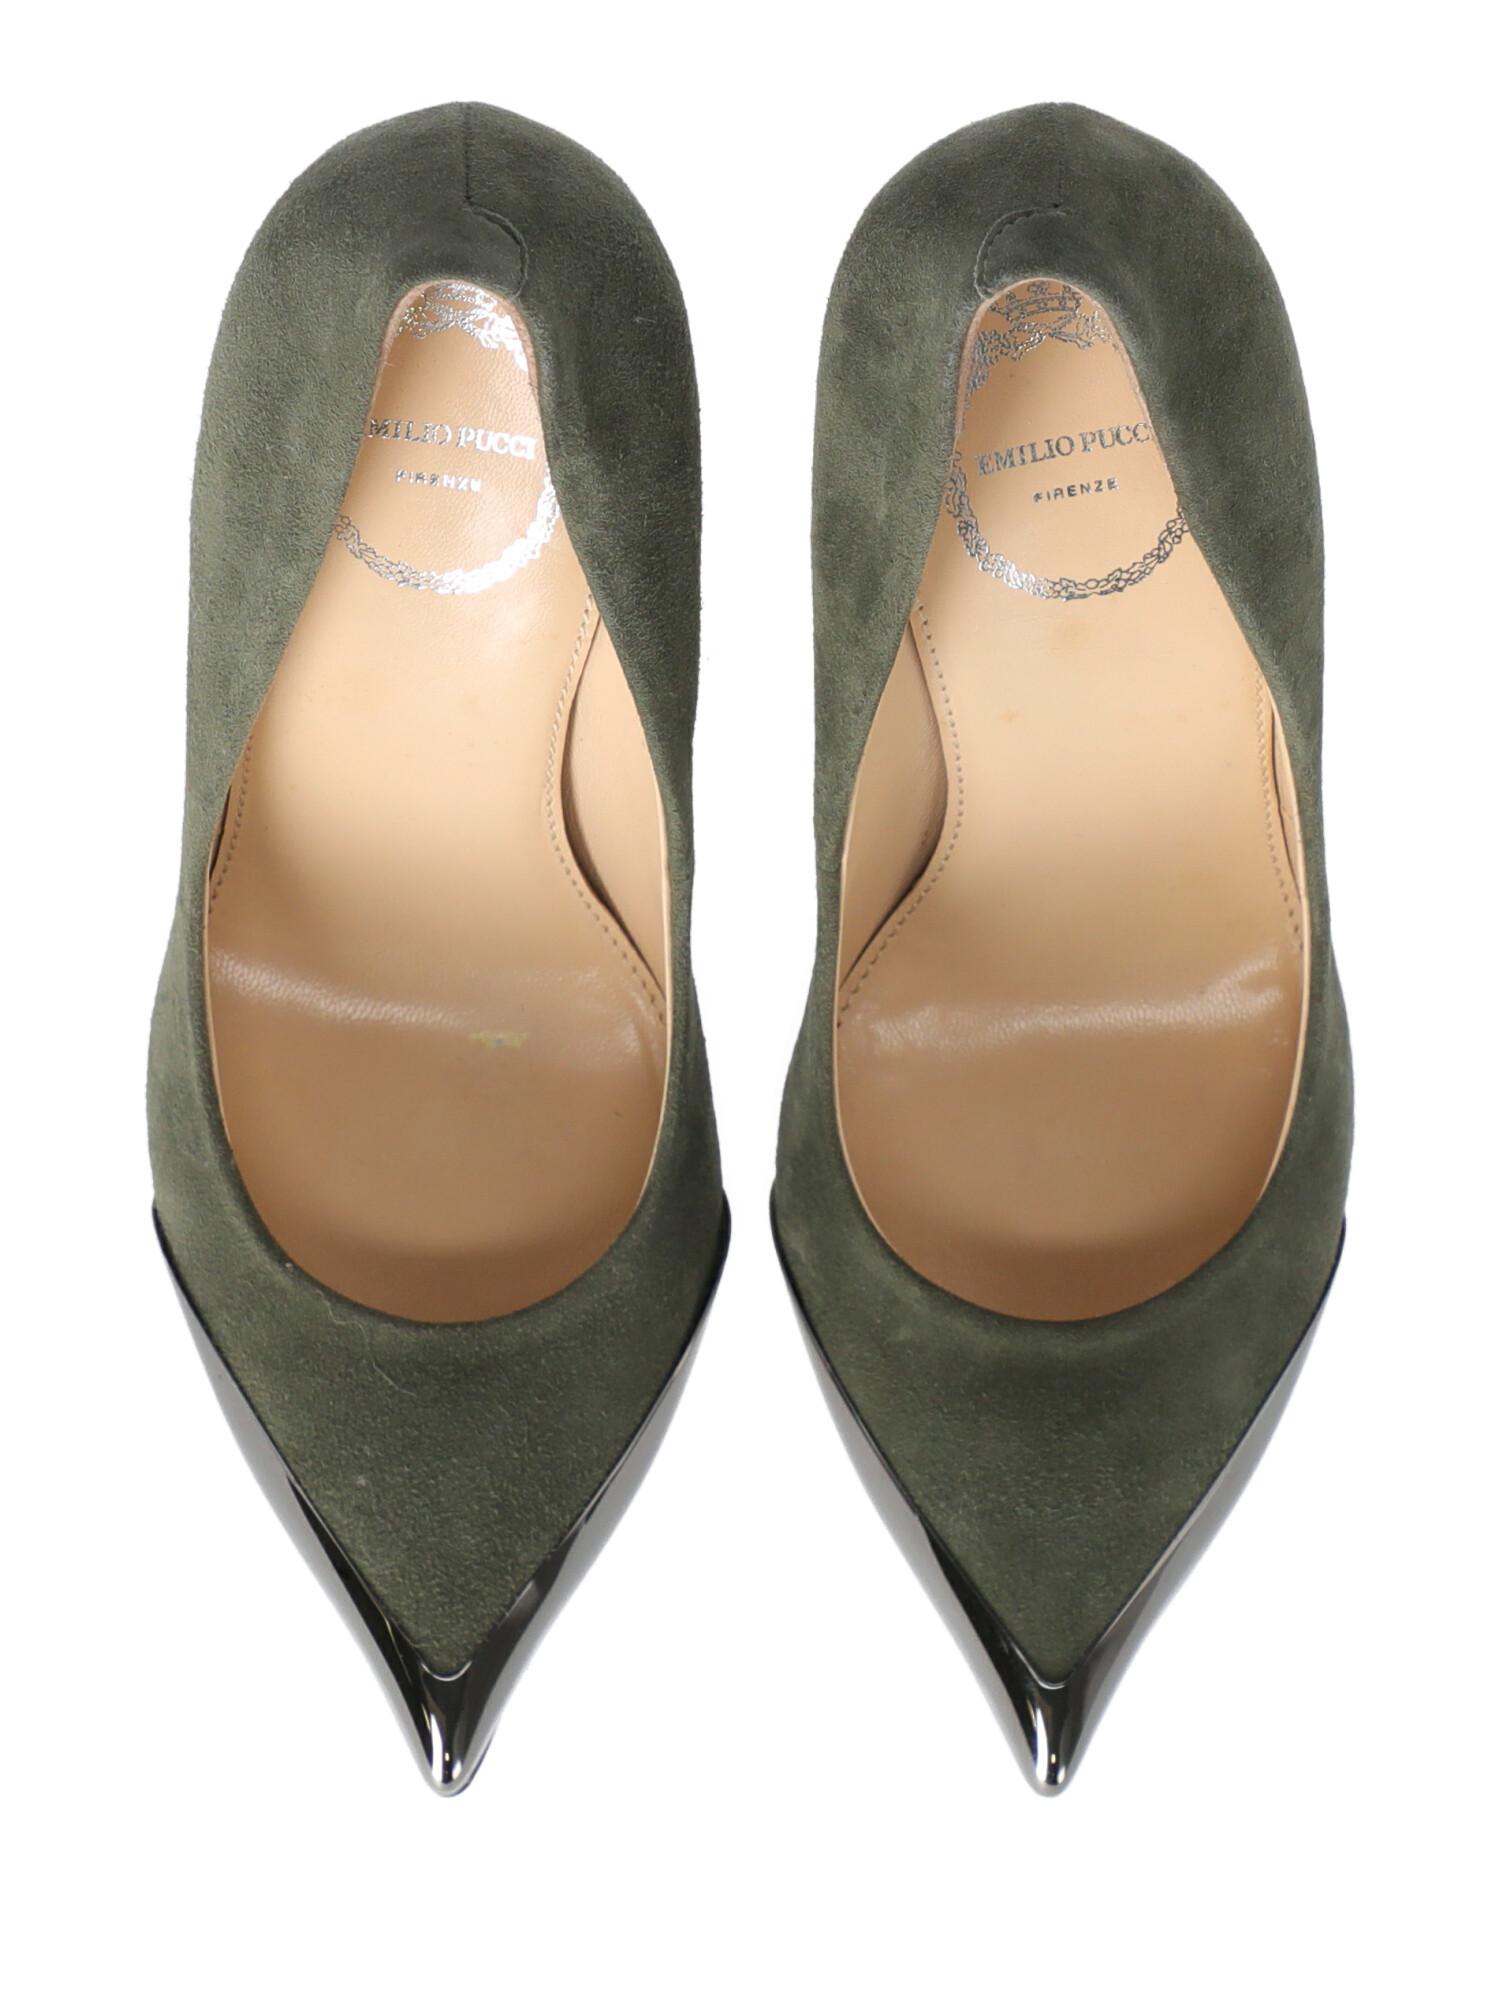 Emilio Pucci Woman Pumps Green Leather IT 36 For Sale 1